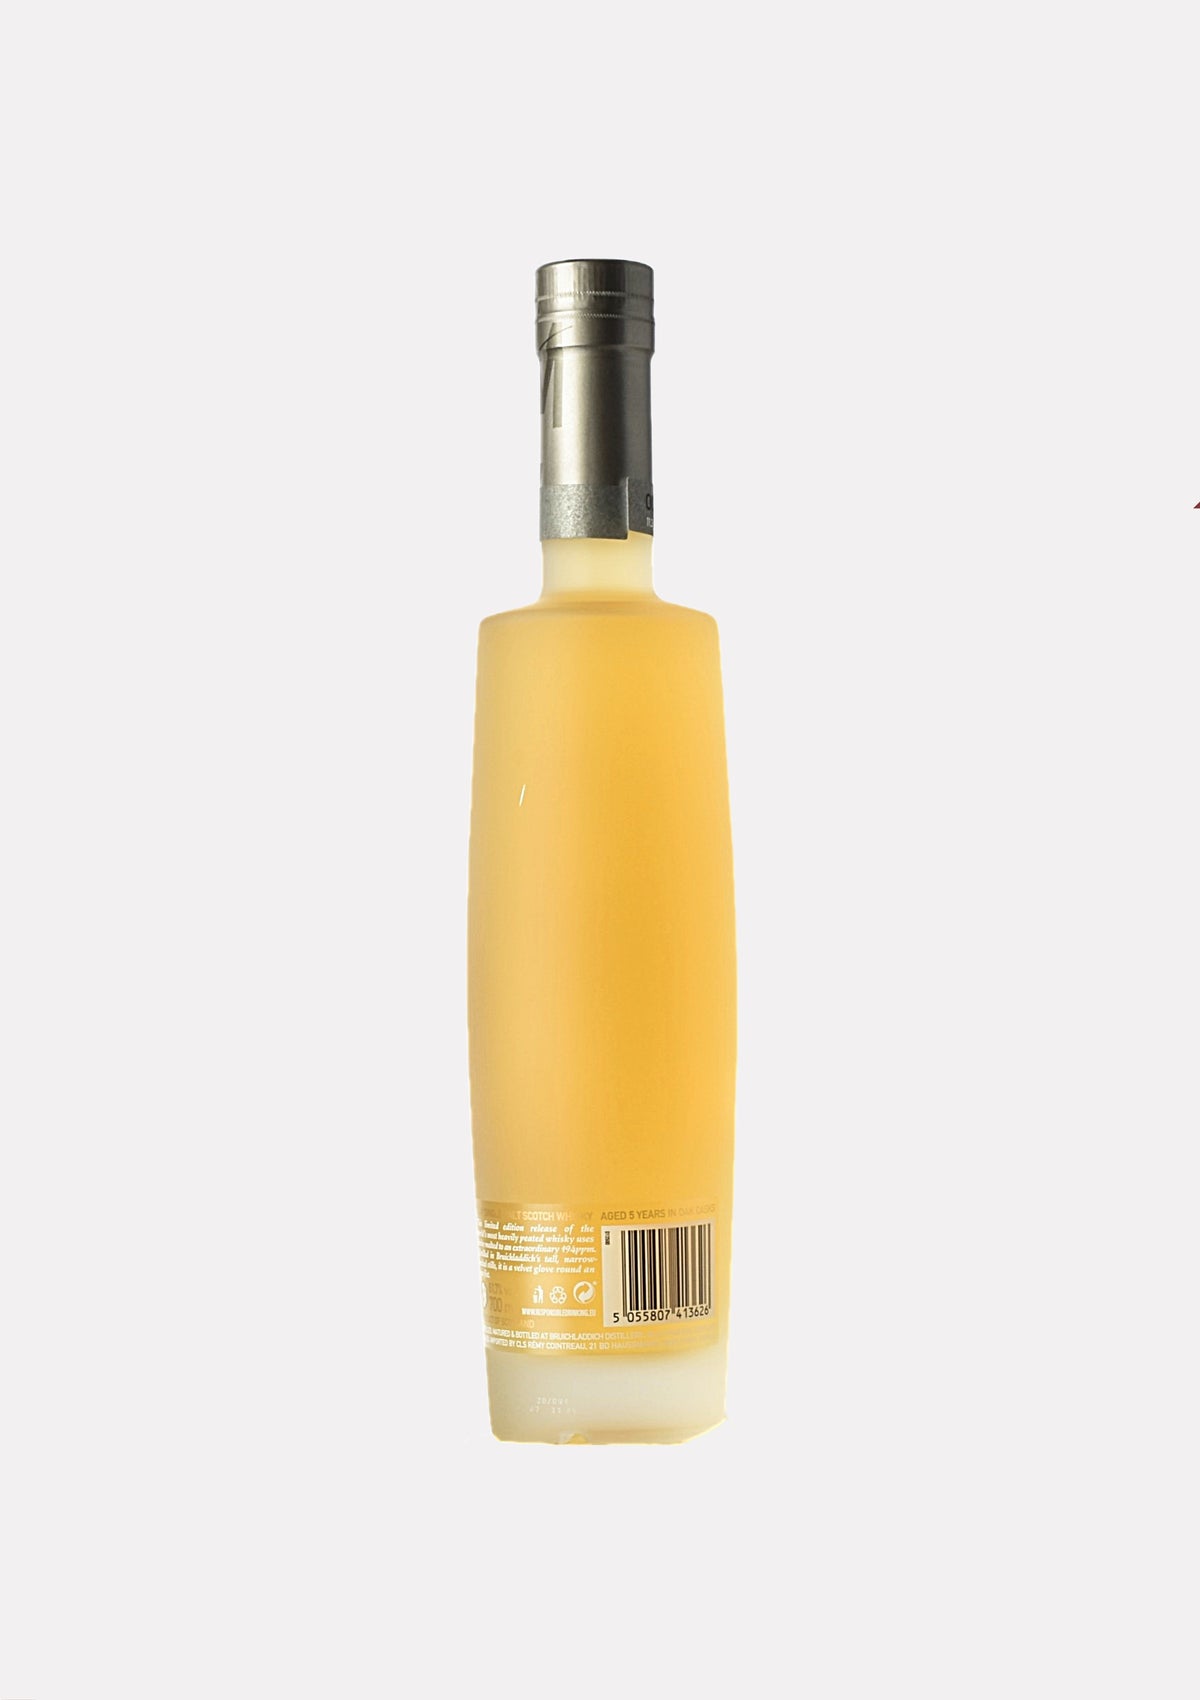 Octomore 2014- 2020 5 Jahre 11.3 194 ppm